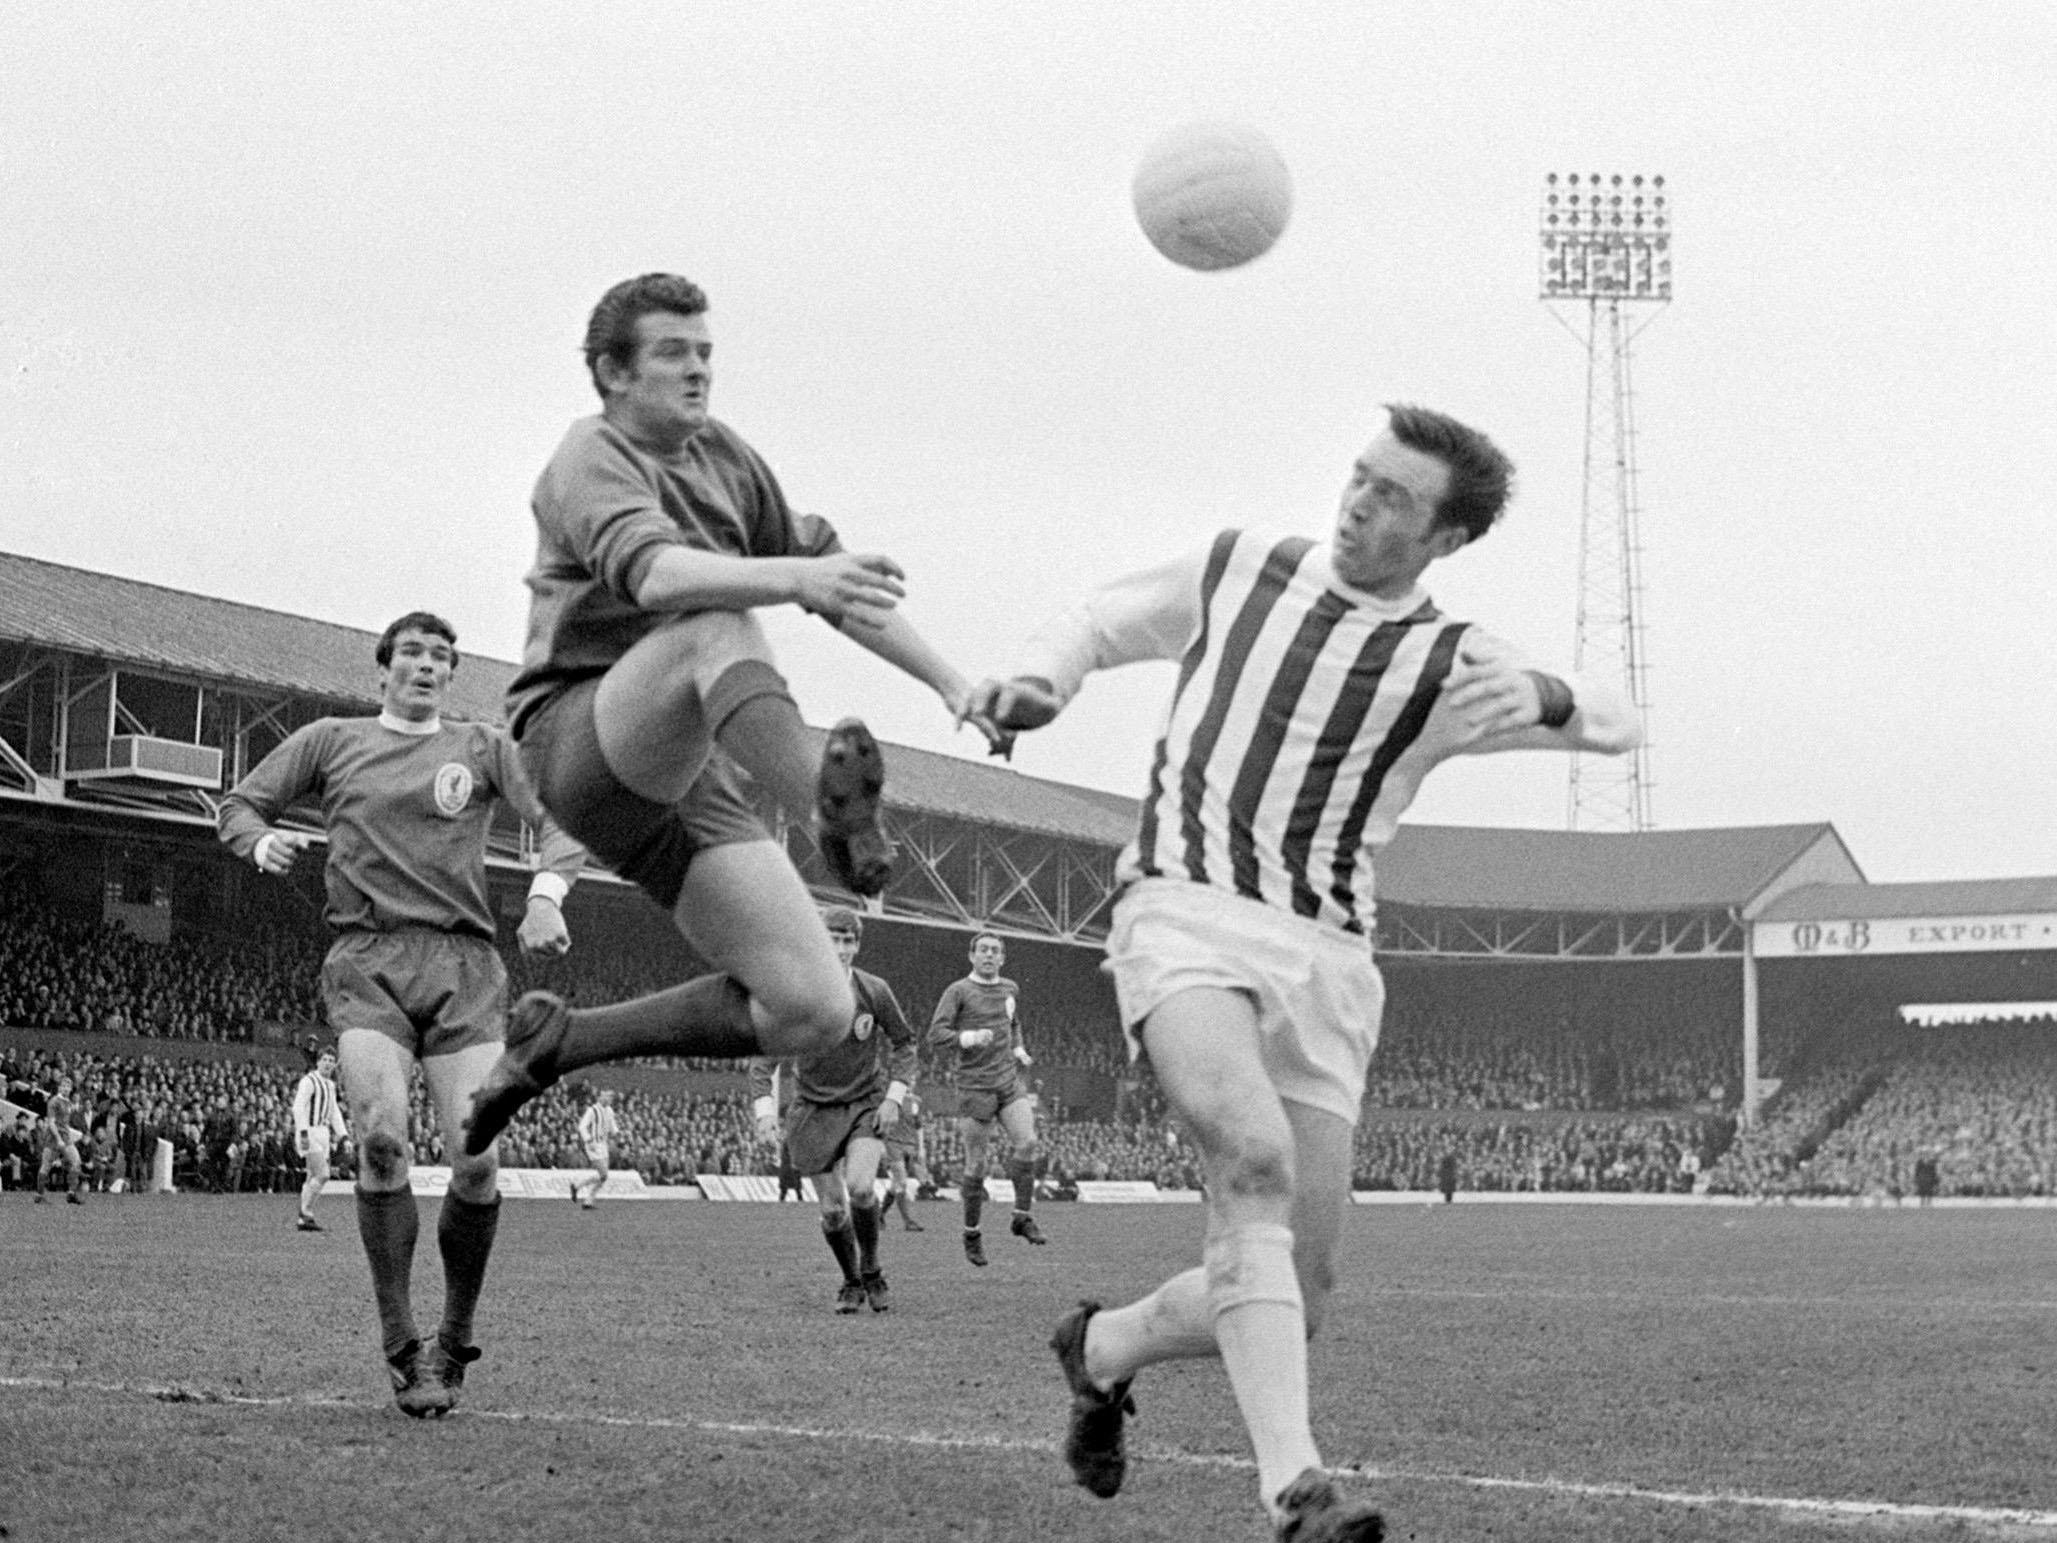 Jeff Astle died 17 years ago from CTE